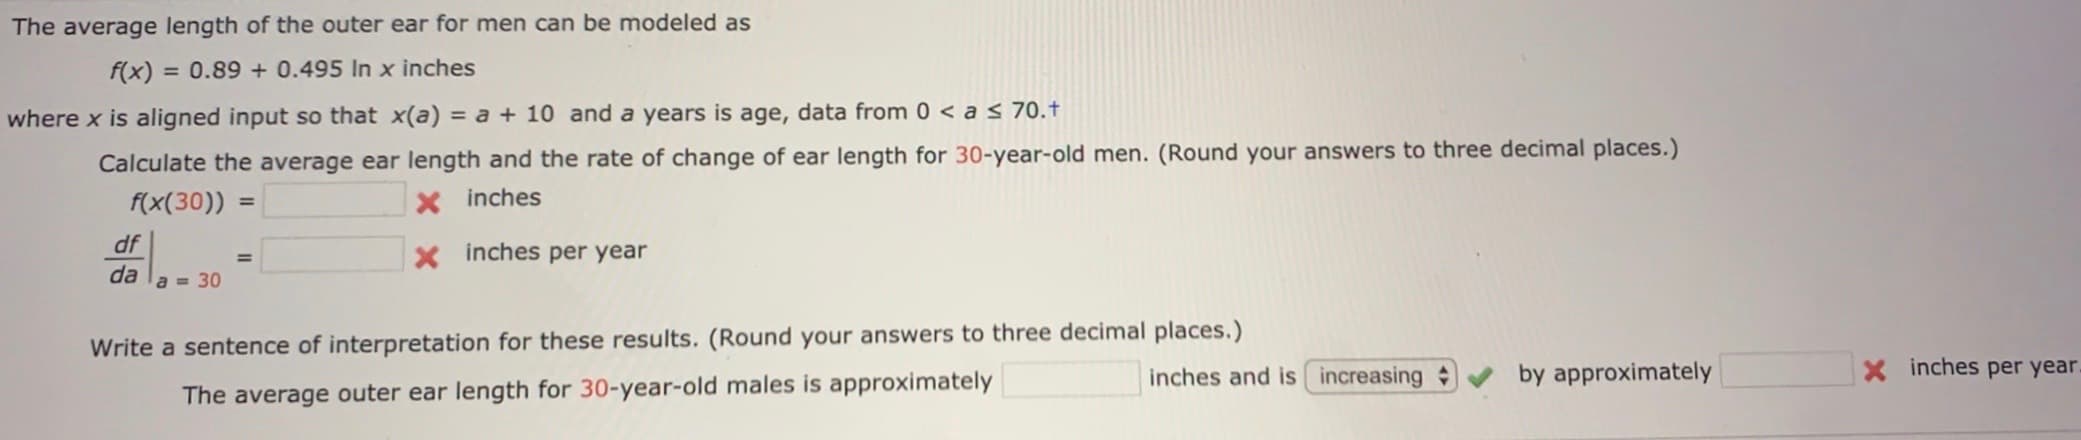 The average length of the outer ear for men can be modeled as
f(x)
= 0.89 + 0.495 In x inches
where x is aligned input so that x(a) = a + 10 and a years is age, data from 0 < a < 70.†
Calculate the average ear length and the rate of change of ear length for 30-year-old men. (Round your answers to three decimal places.)
f(x(30))
X inches
%3D
df
X inches per year
%3D
da
a = 30
Write a sentence of interpretation for these results. (Round your answers to three decimal places.)
inches and is increasing
by approximately
X inches per year.
The average outer ear length for 30-year-old males is approximately
